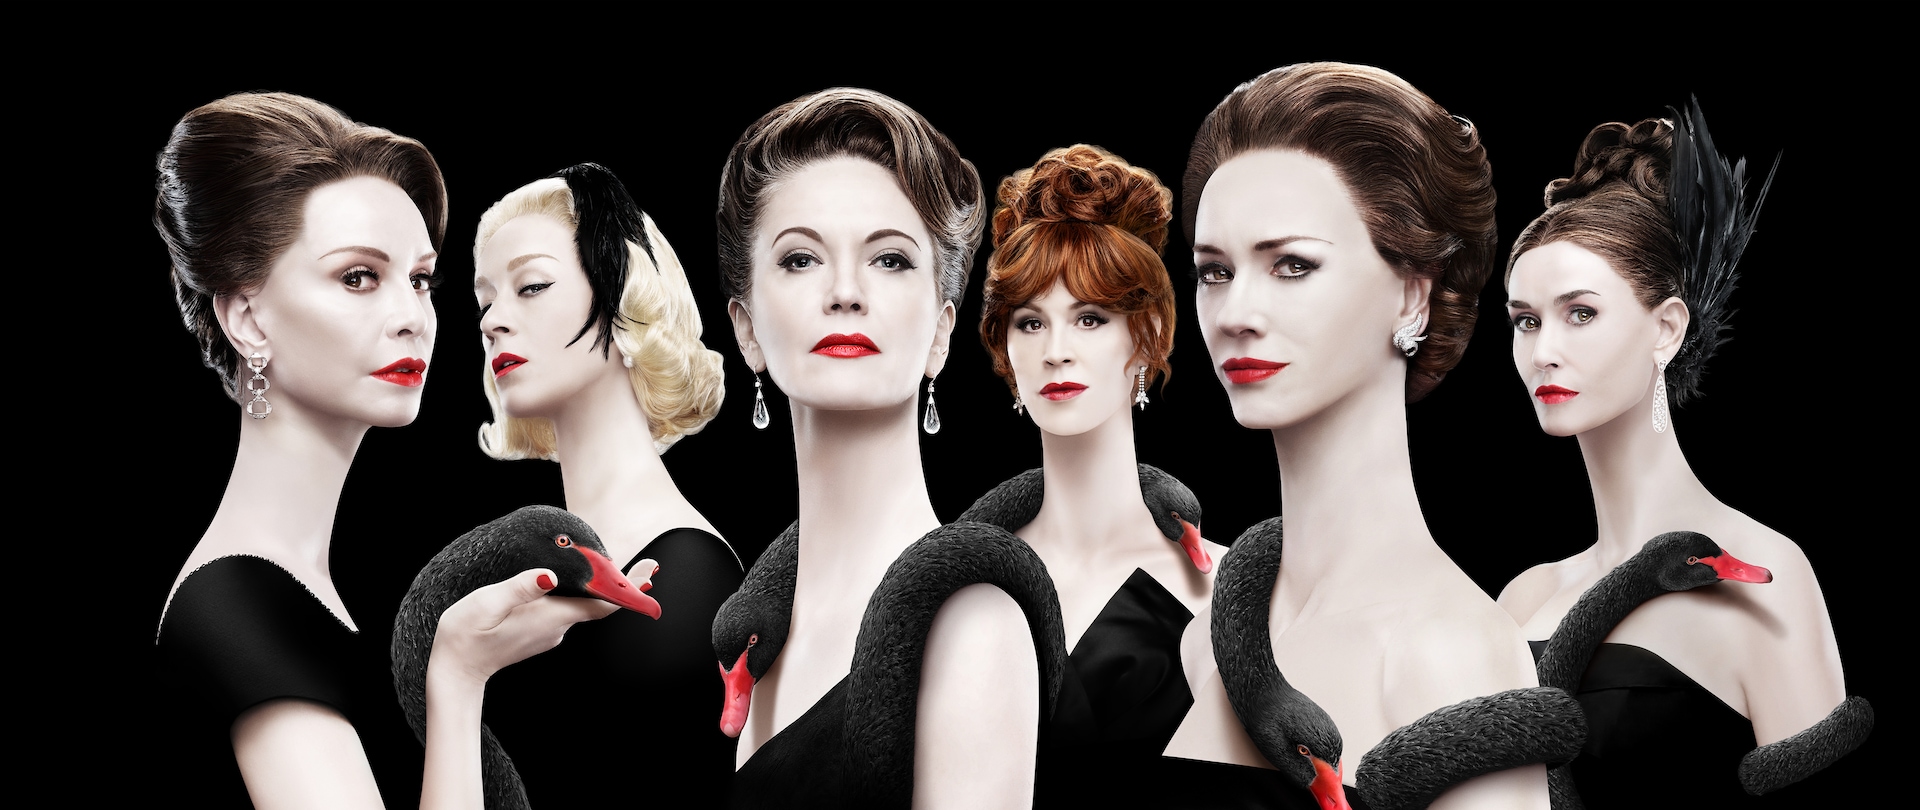 The Swans dressed in black for FX's FEUD